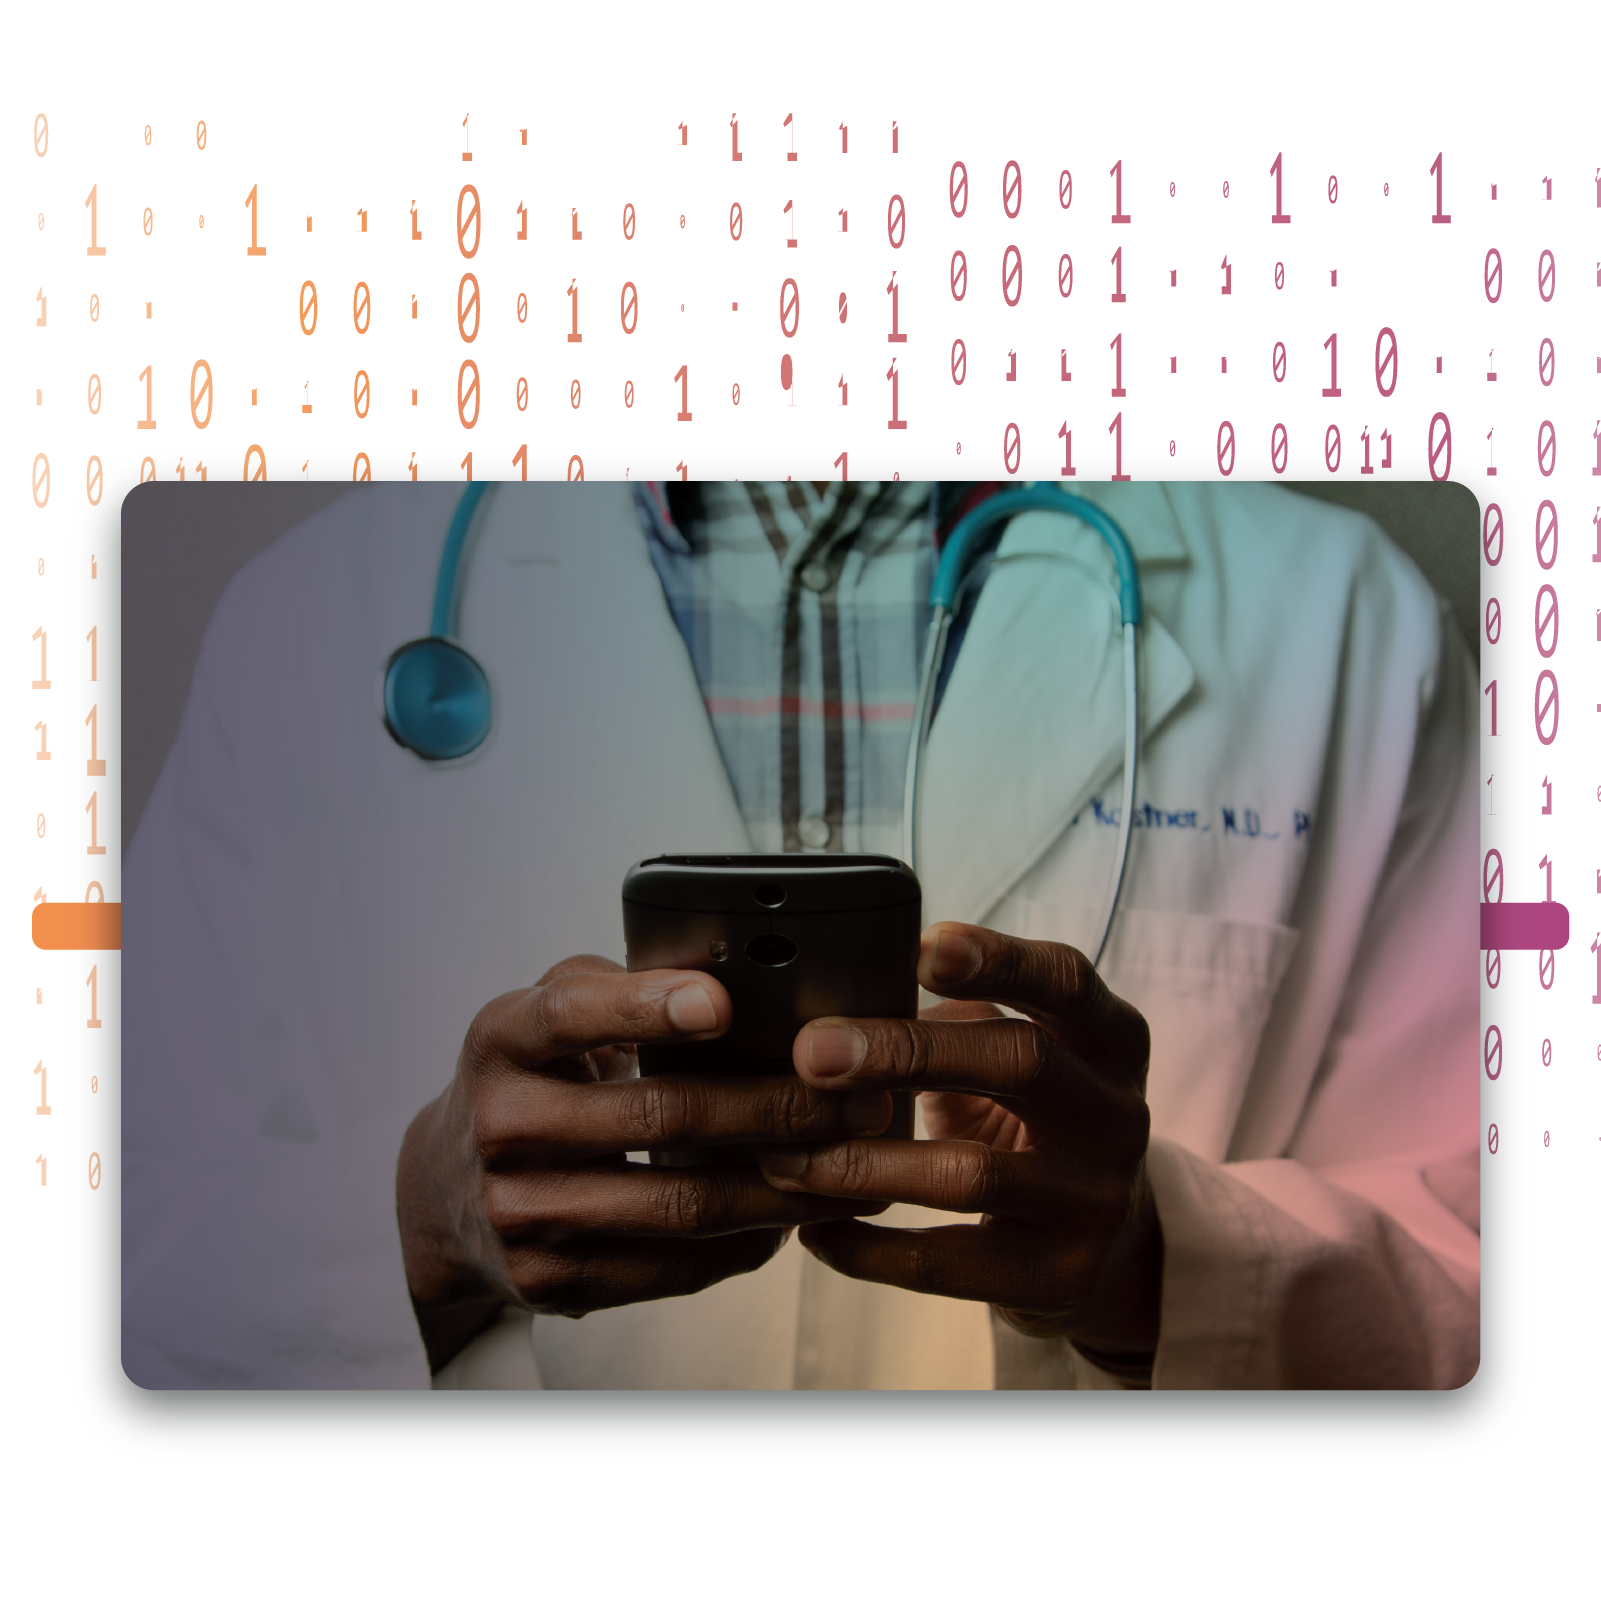 A doctor with a mobile phone and code in the background.